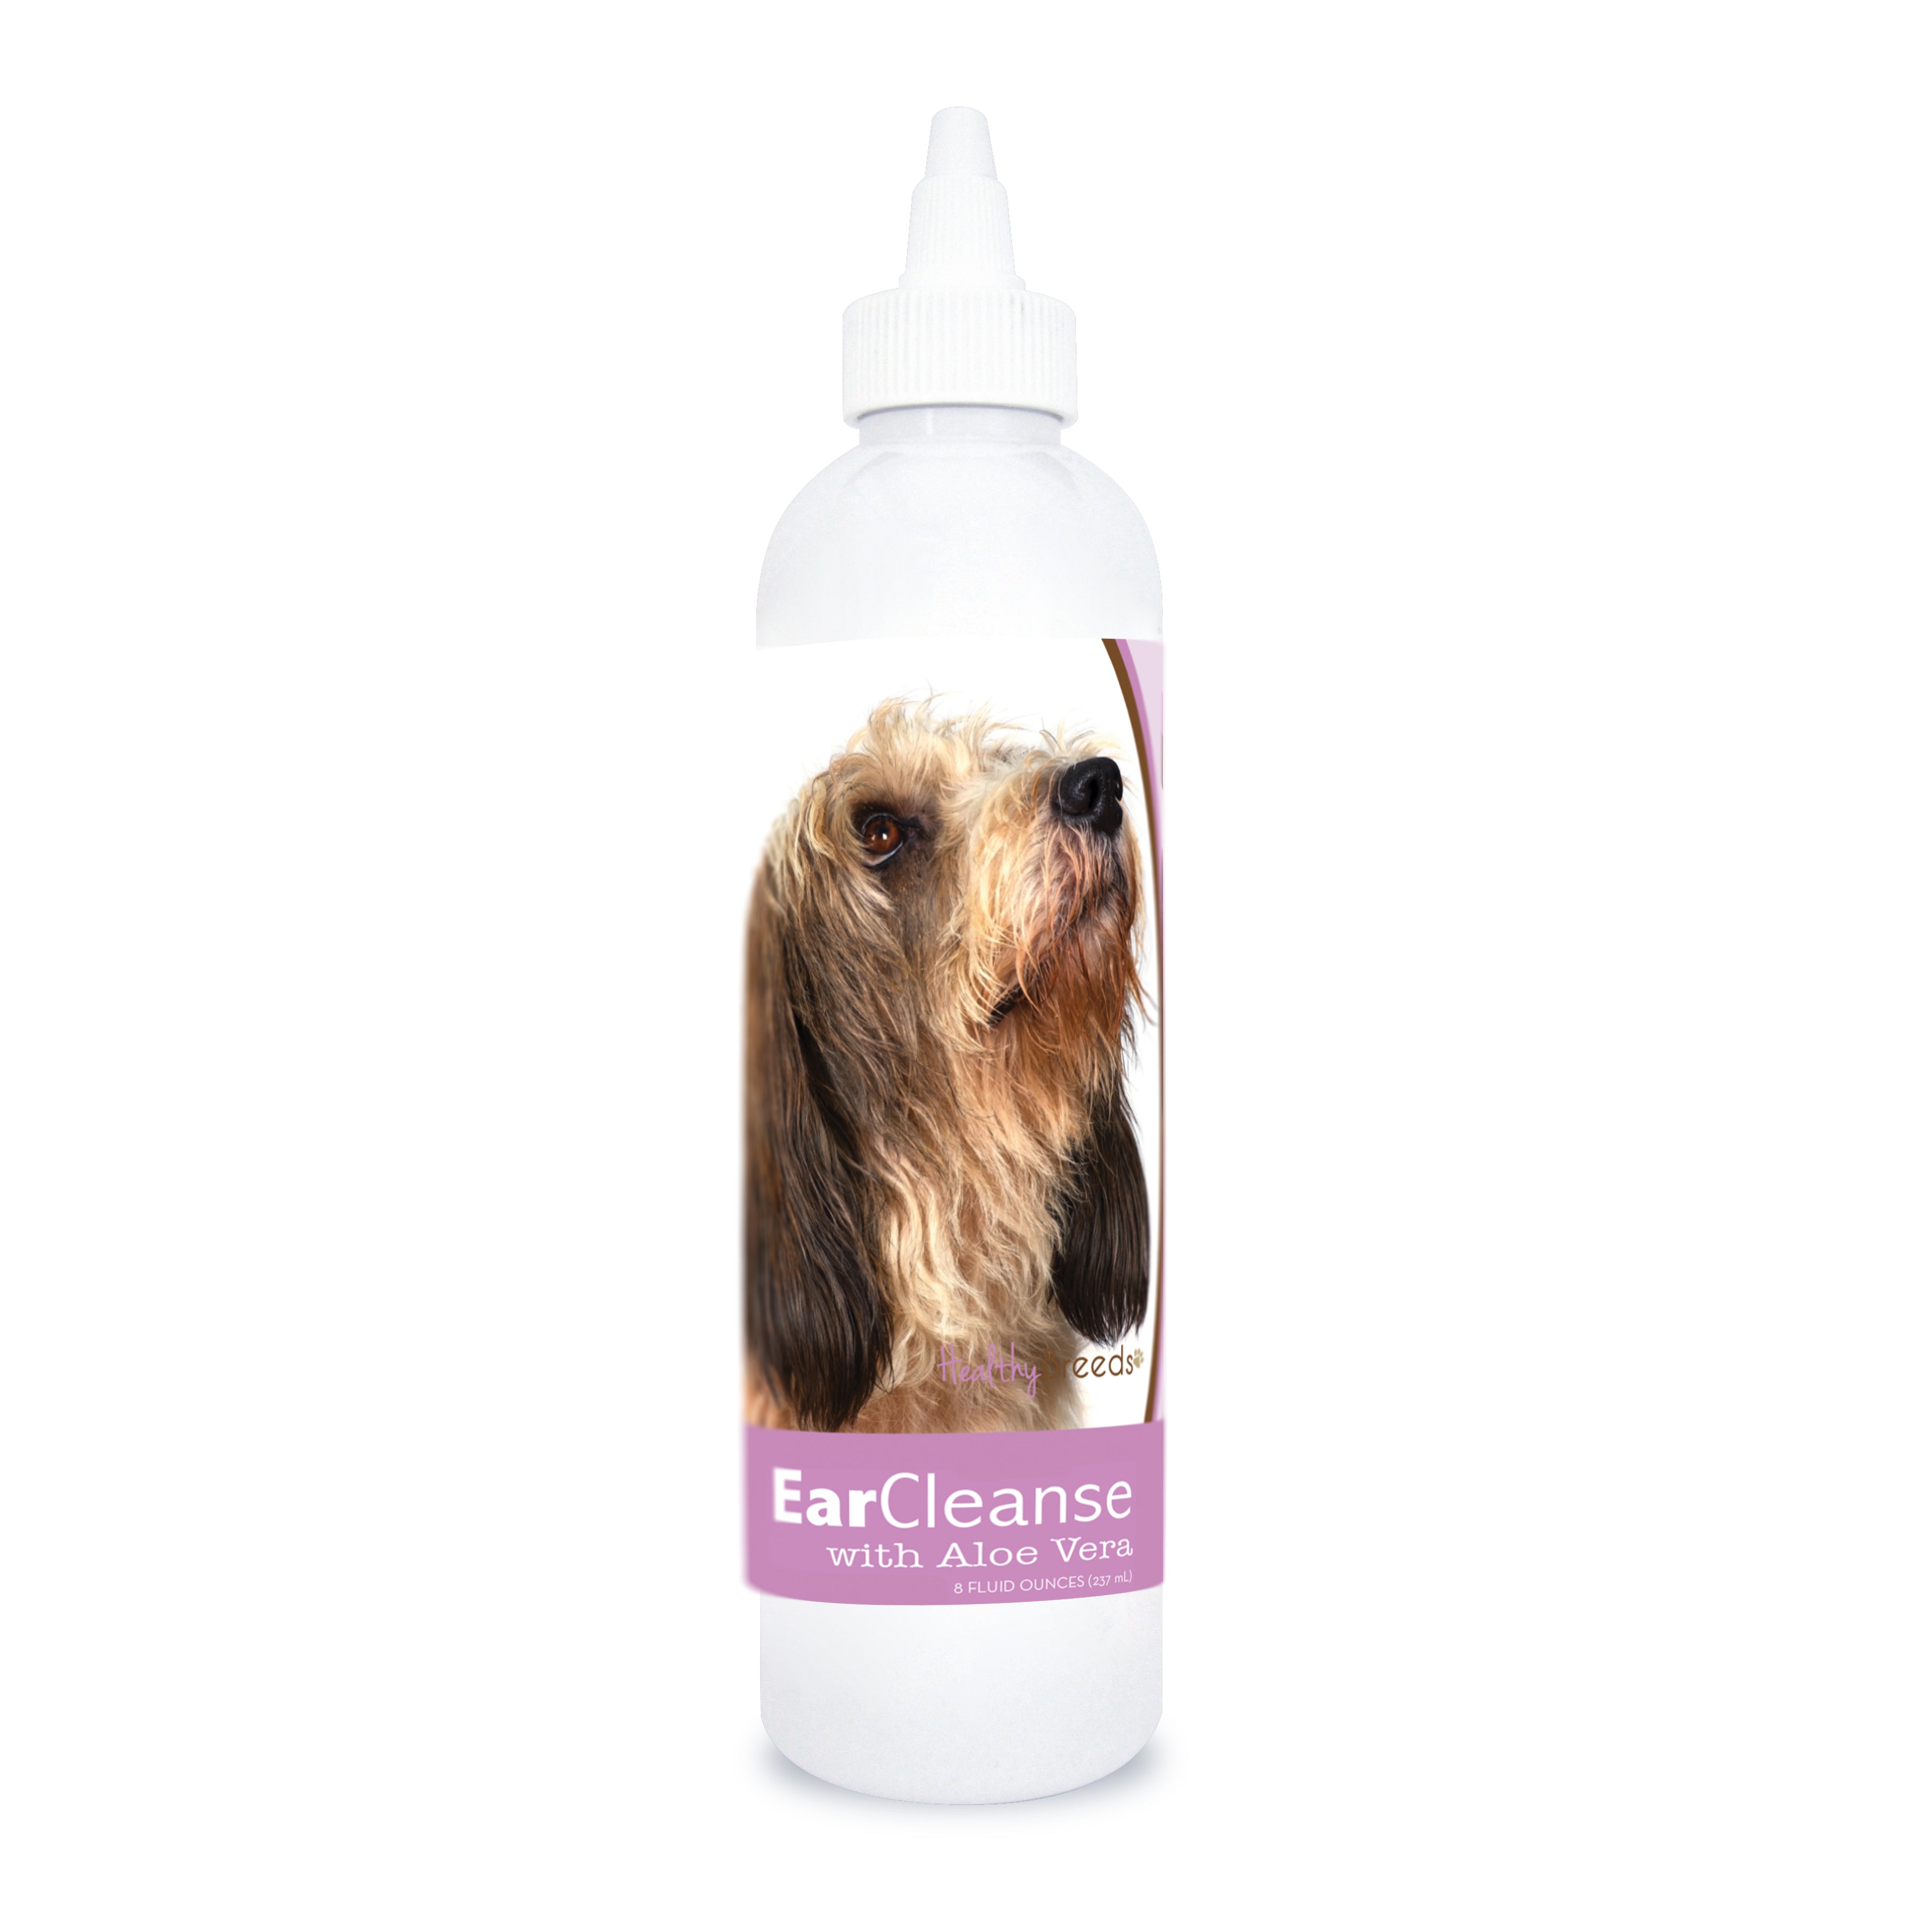 Petits Bassets Griffons Vendeen Ear Cleanse with Aloe Vera Sweet Pea and Vanilla 8 oz